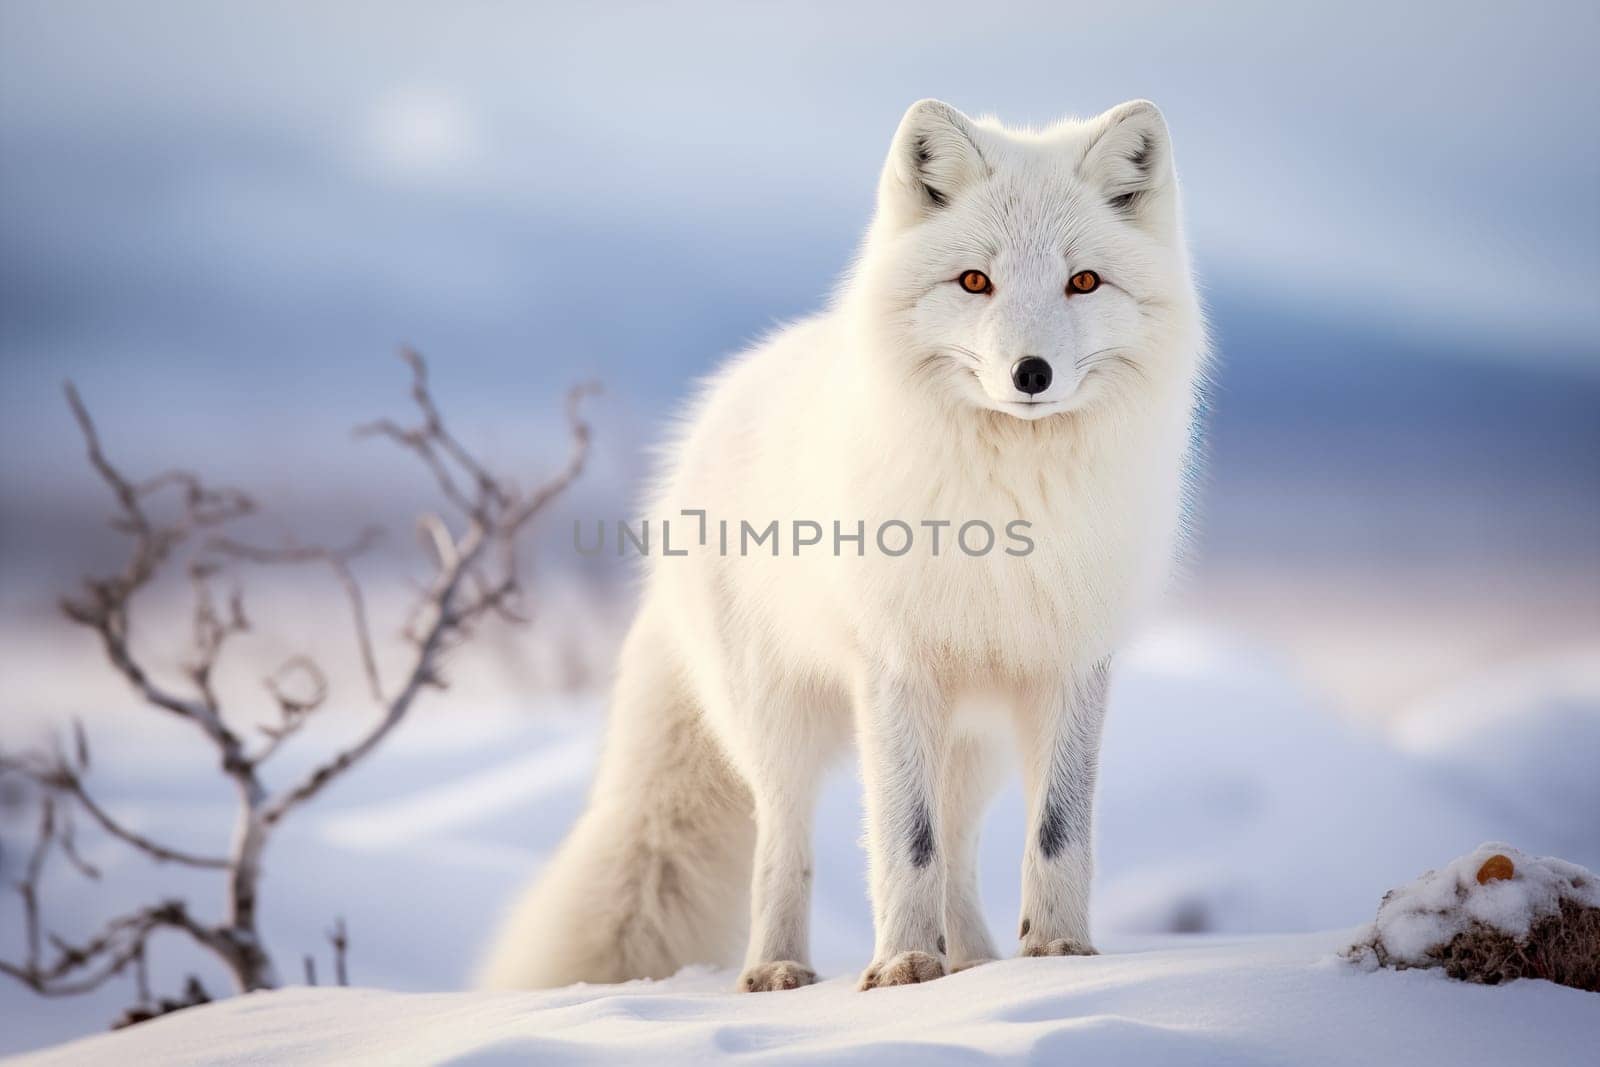 White Arctic fox standing on a snowy hill. The beauty and resilience of the fox in its natural habitat